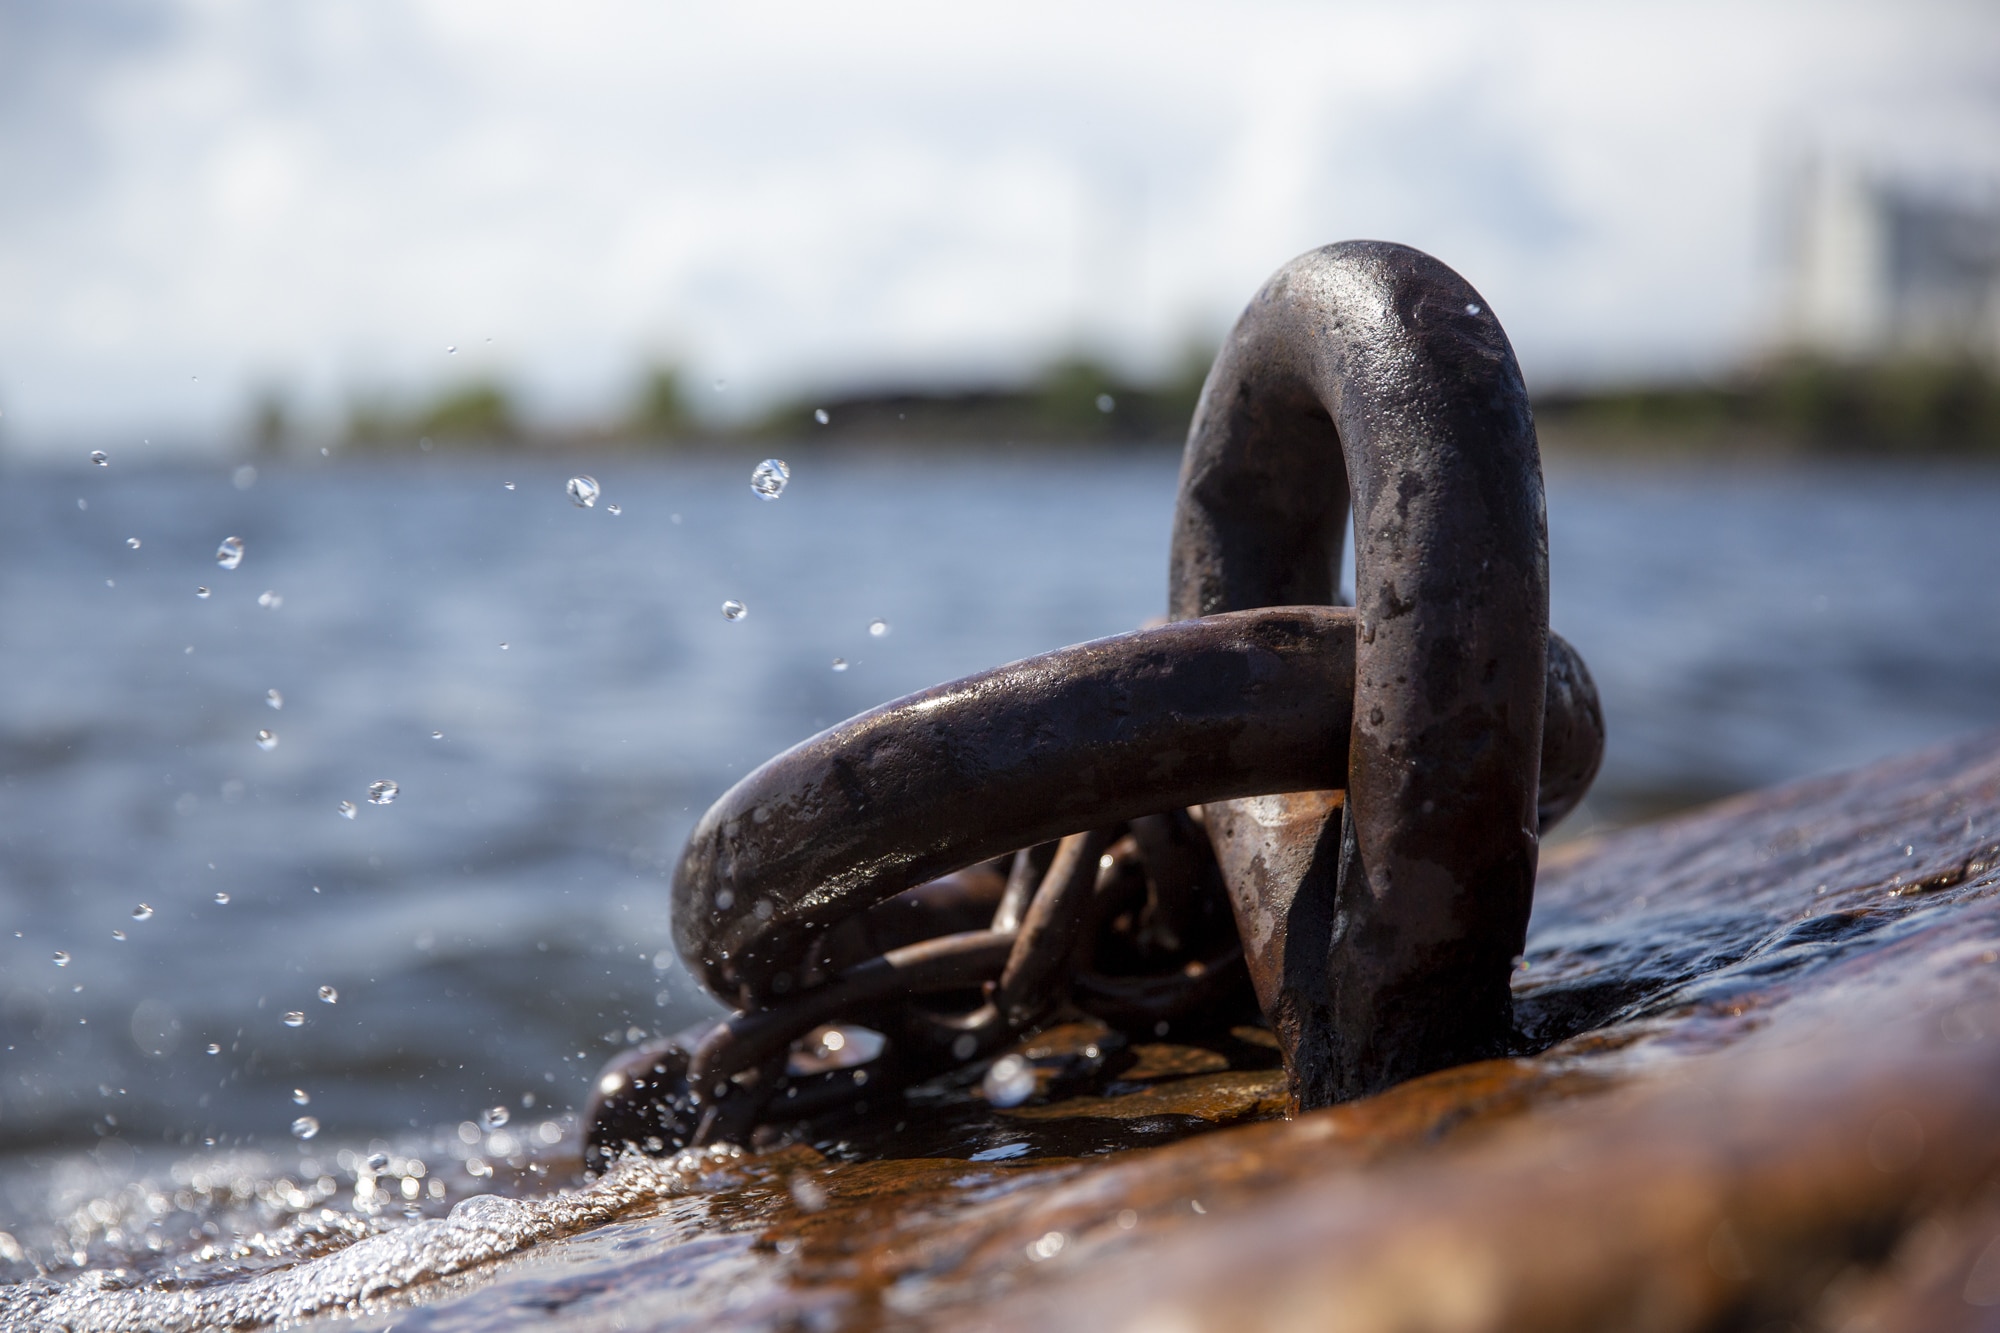 Rusty mooring bolt with splashing waves in the background.